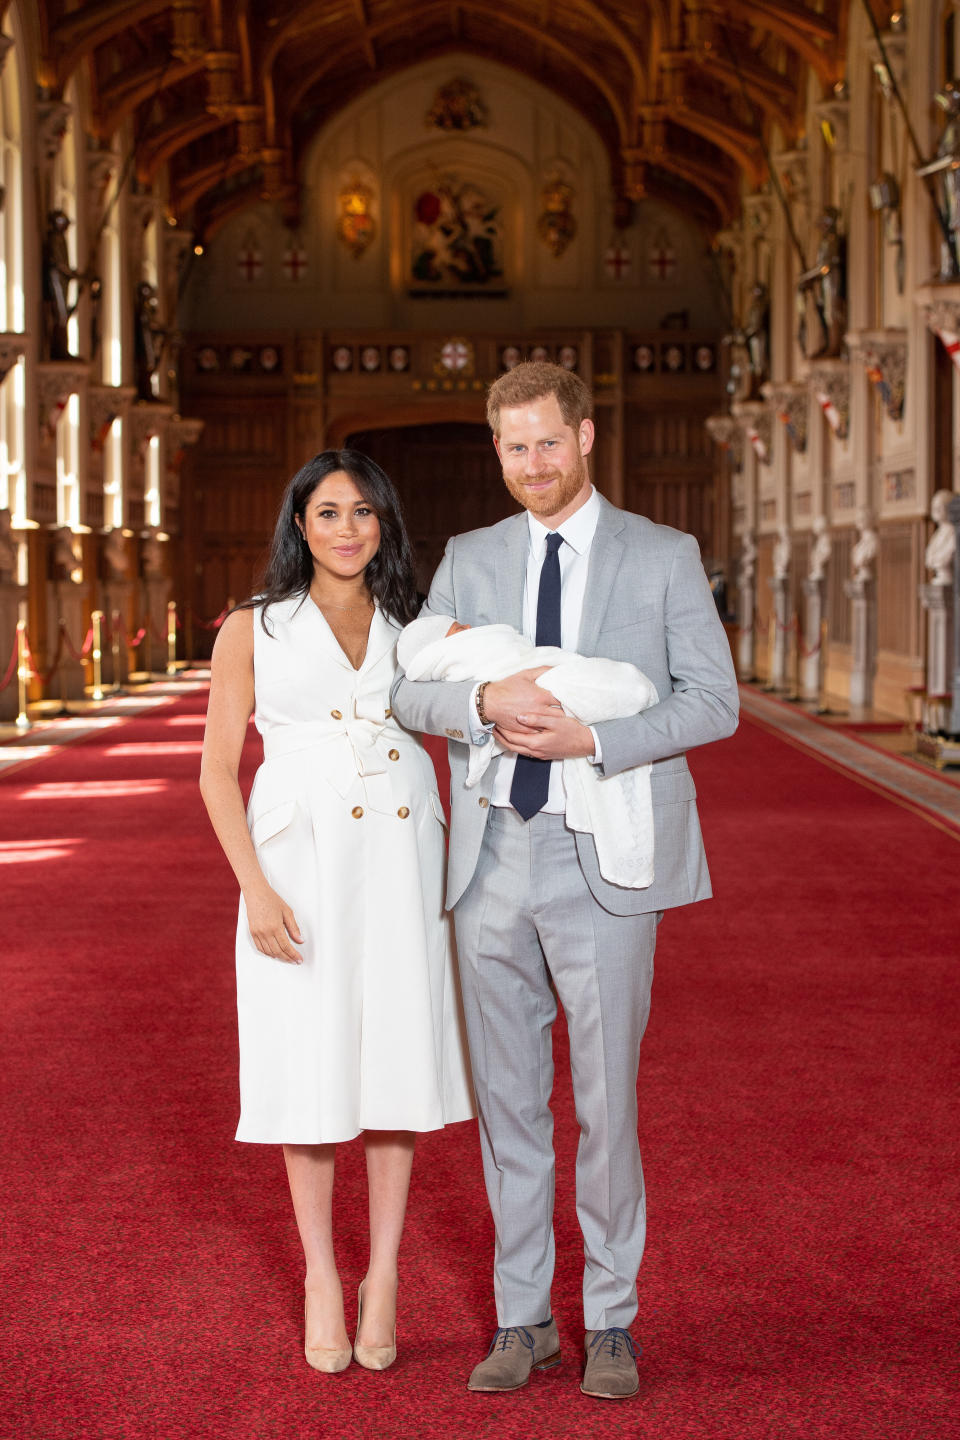 The Duke and Duchess of Sussex with their baby son, who was born on Monday morning, during a photocall in St George's Hall at Windsor Castle in Berkshire. (PA Wire/PA Images)